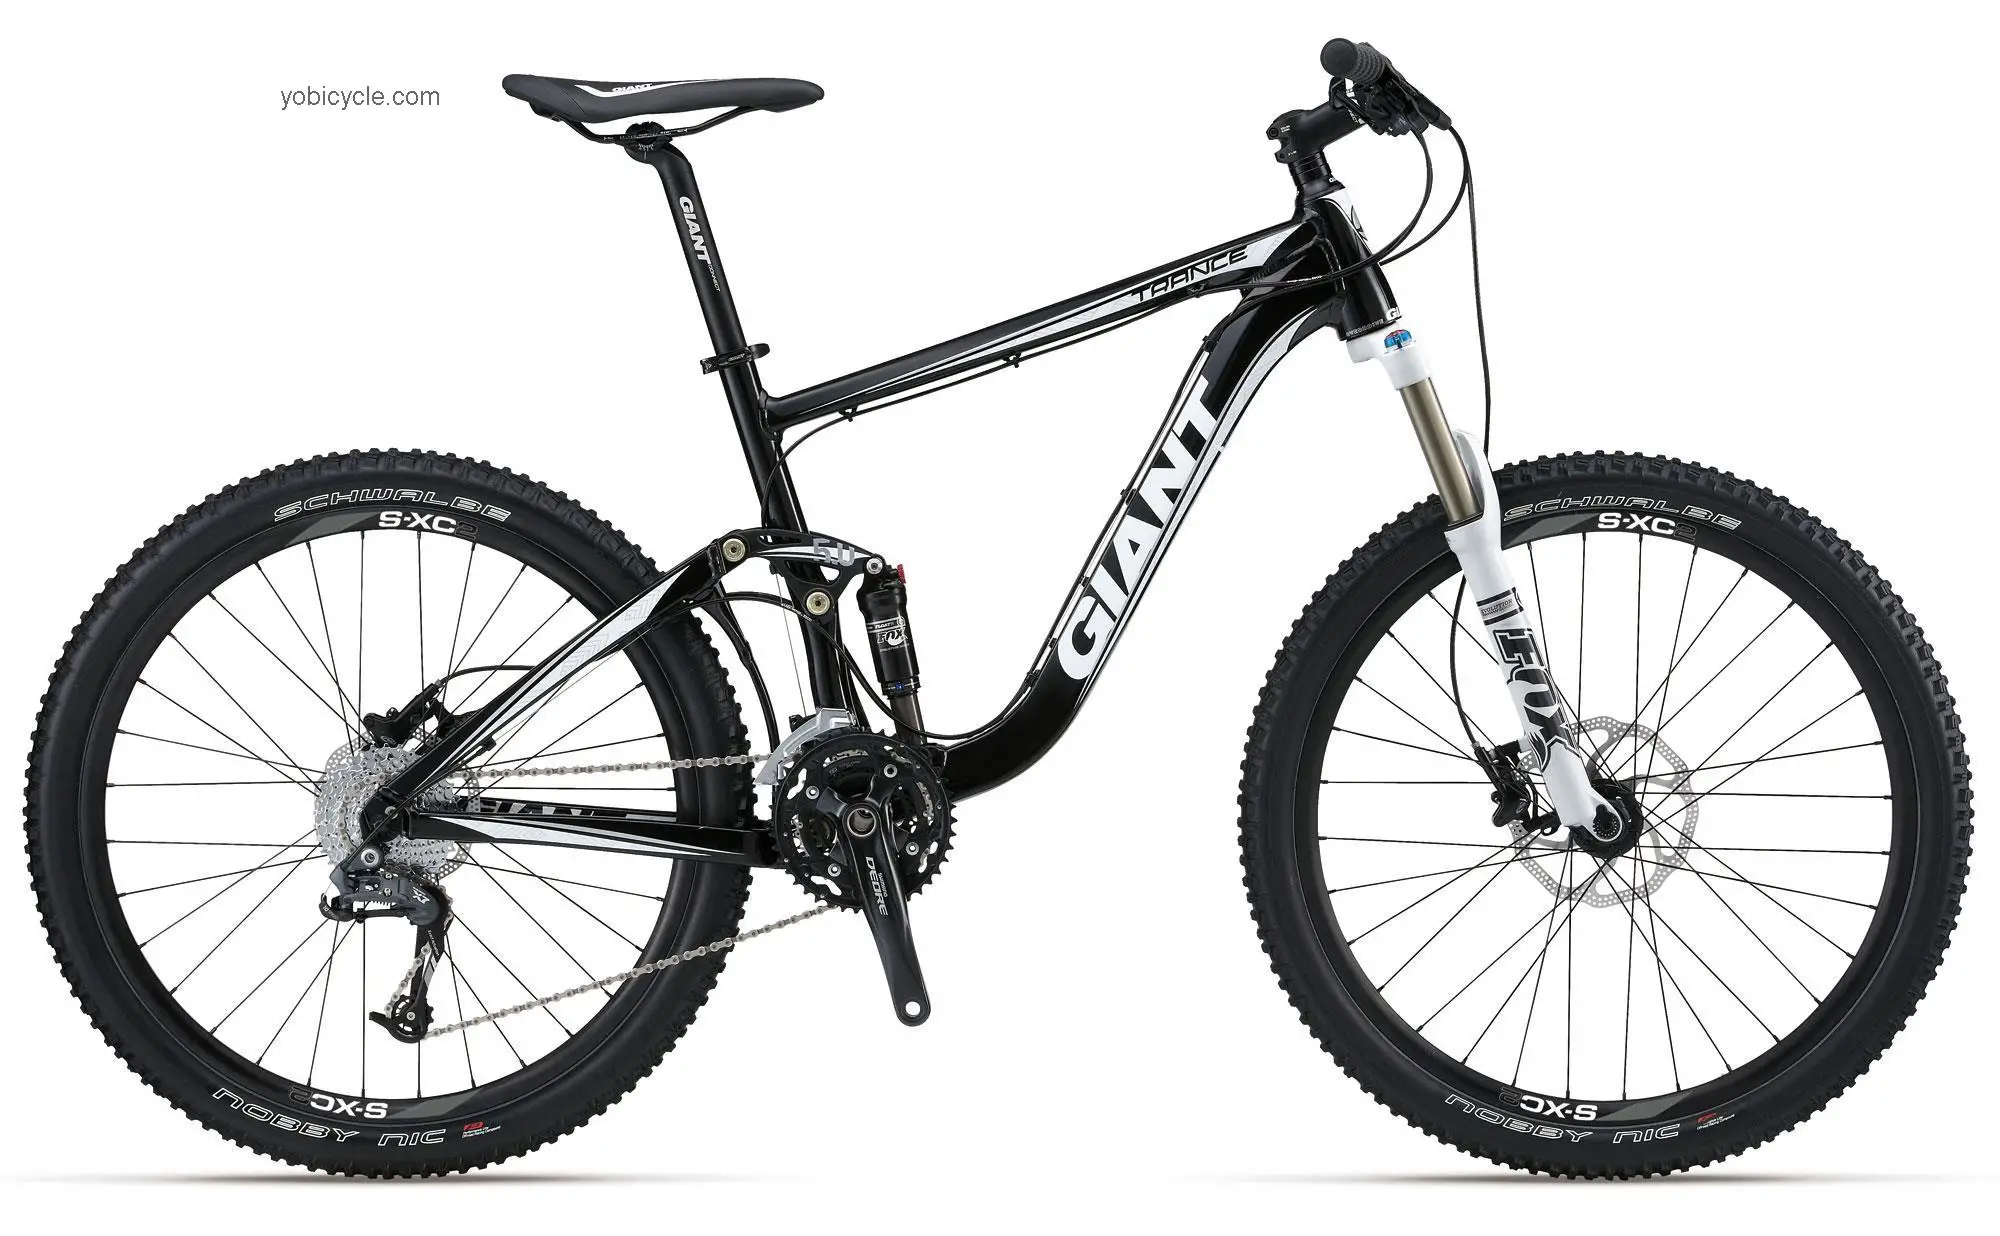 Giant Trance X 3 2012 comparison online with competitors